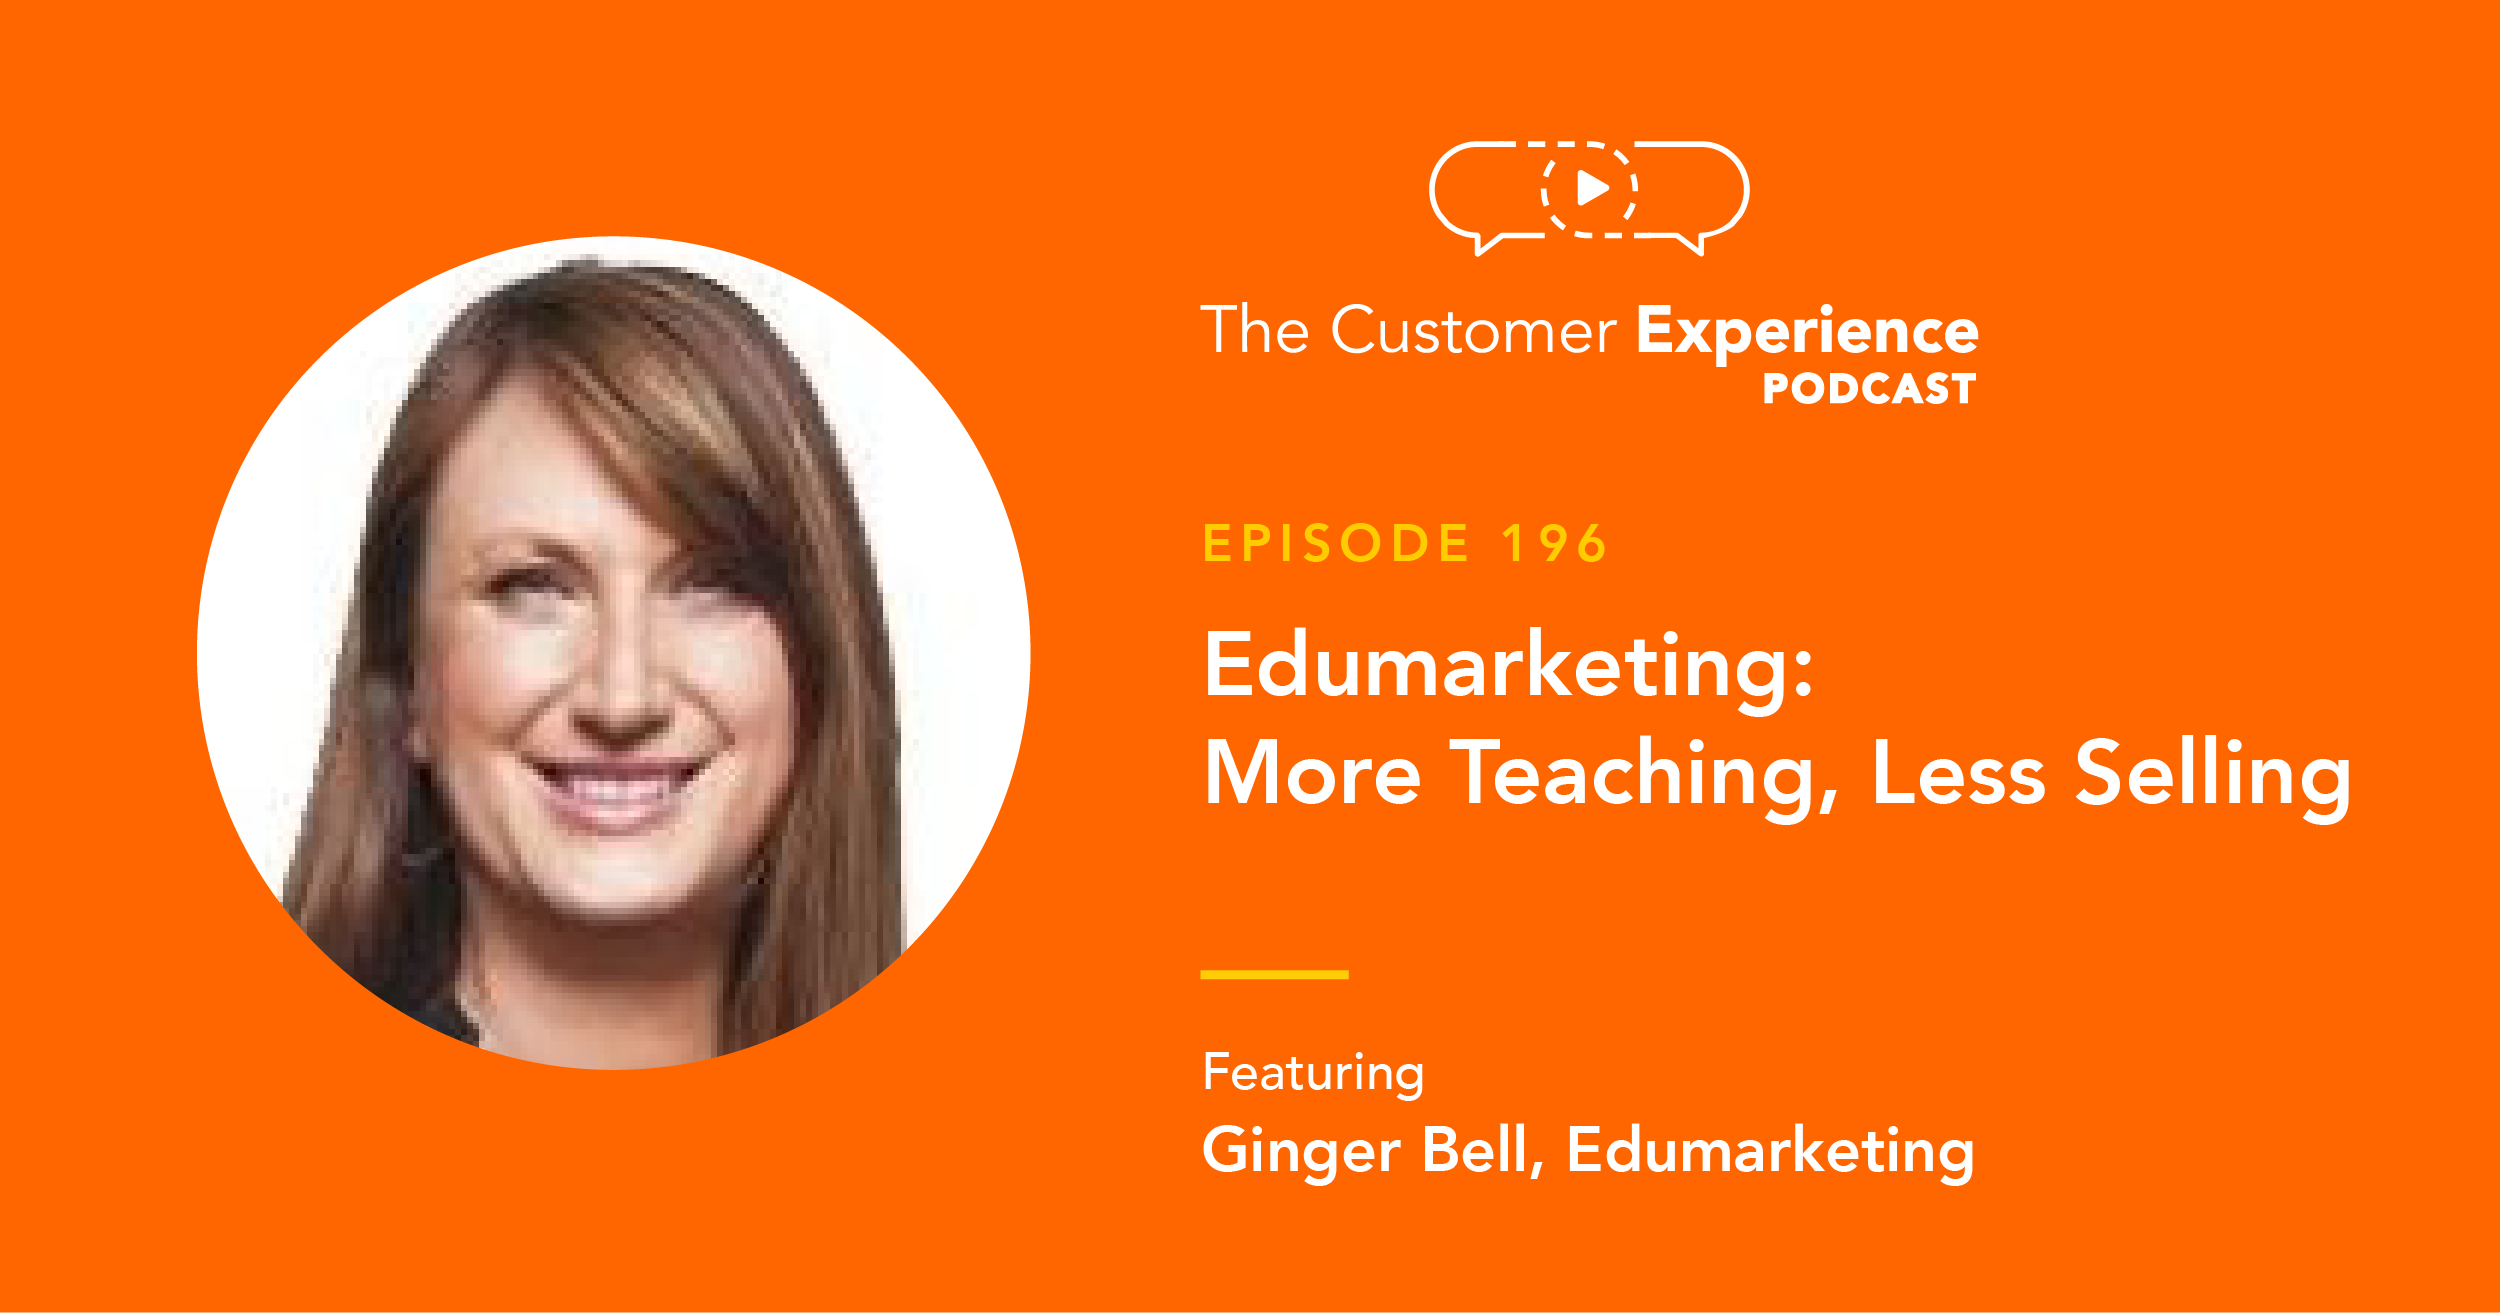 Ginger Bell, Edumarketing, Mortgage, The Customer Experience Podcast, education, marketing, video training, video tips, video marketing, educational video, lead generation, lead conversion, loan officer, pull through rate